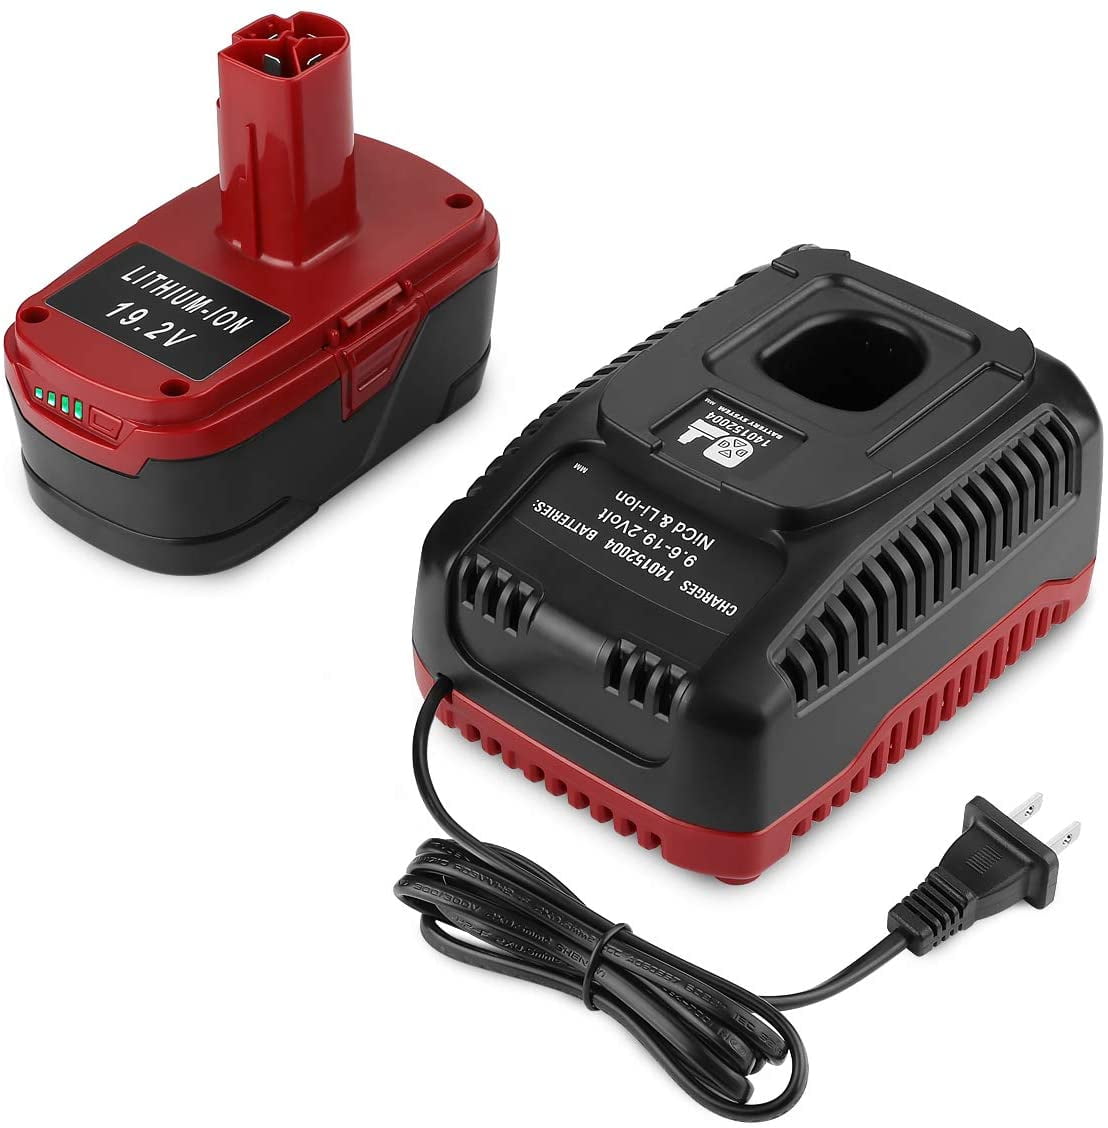 Bulk Packaged Craftsman C3 19.2 volt Lithium-Ion & Ni-cad Battery Charger 